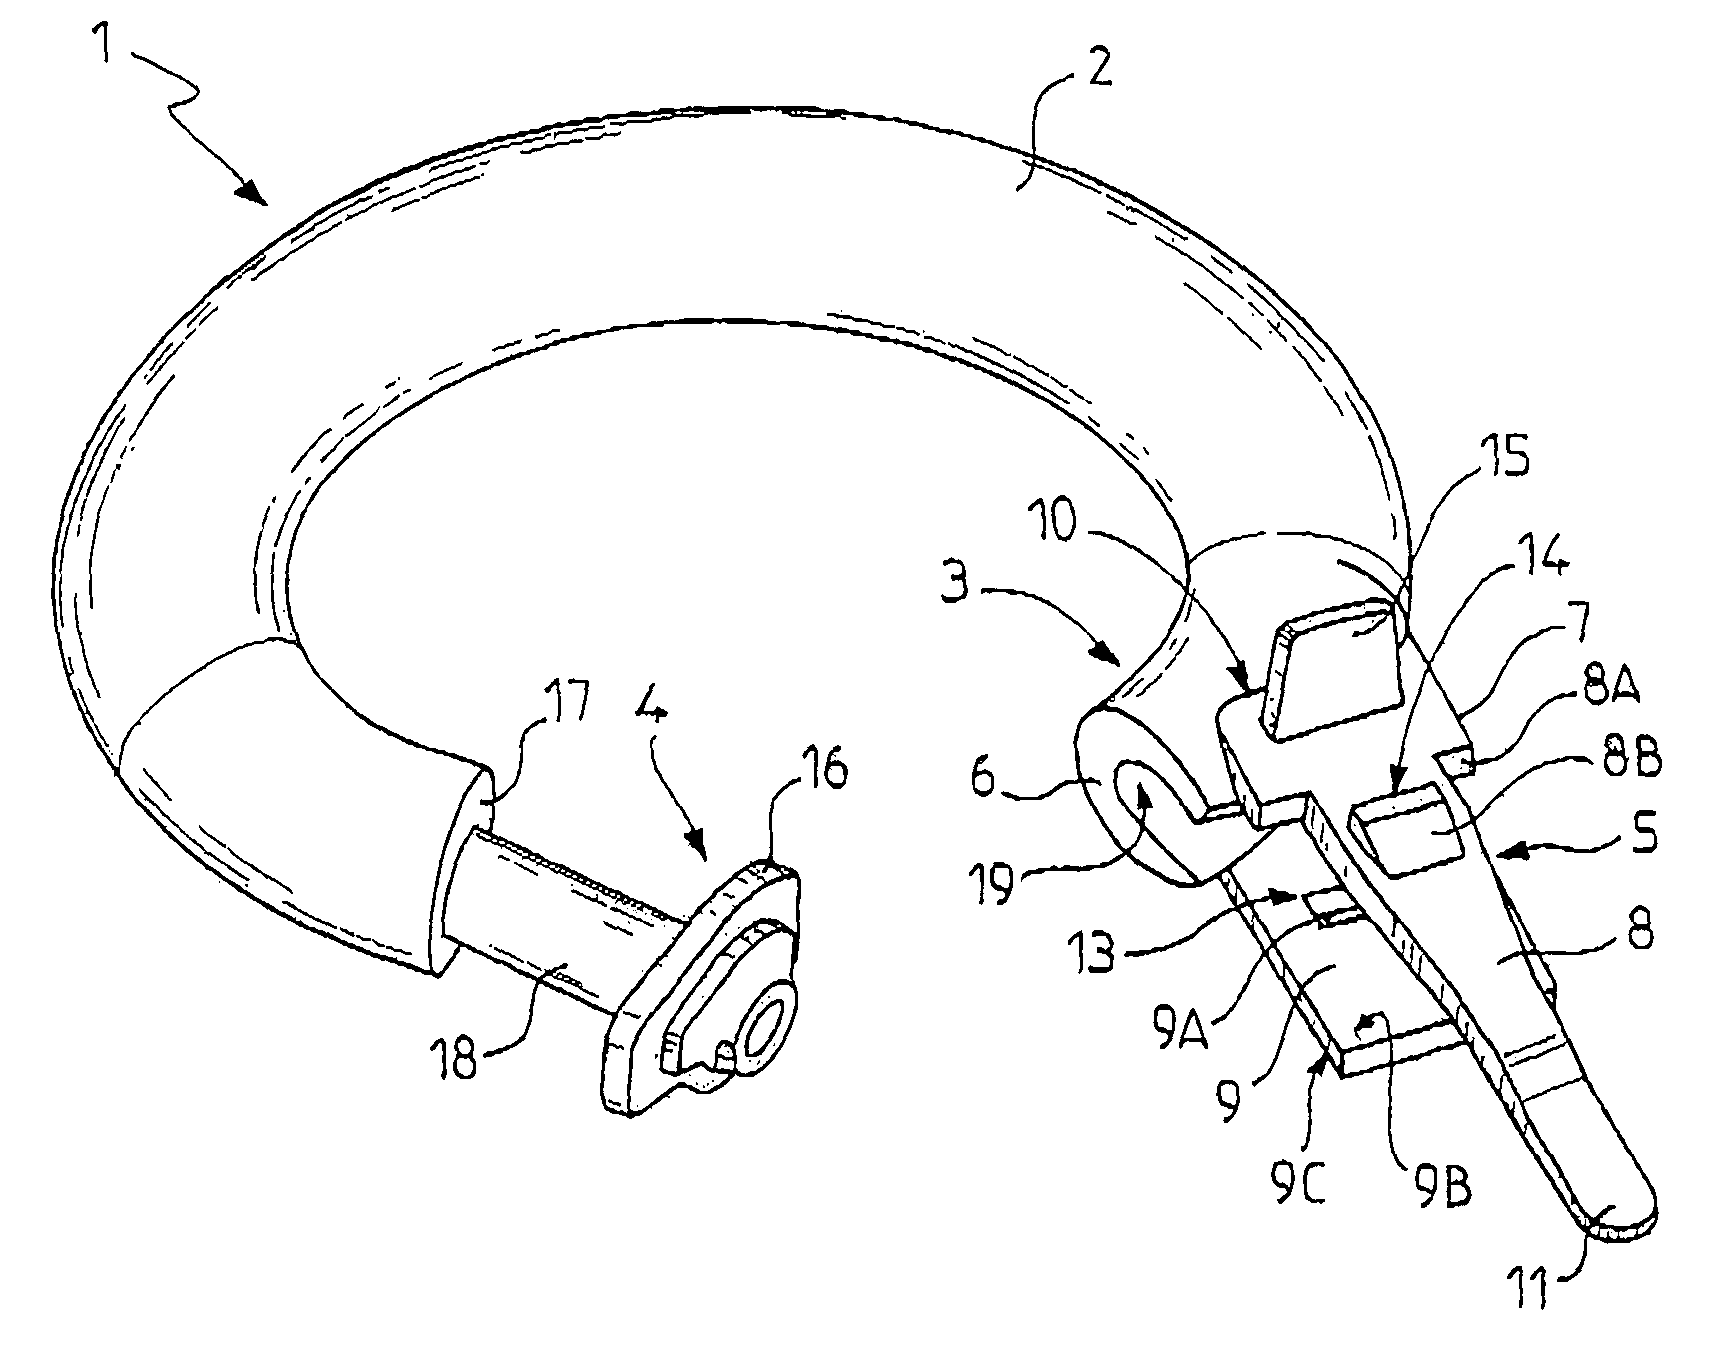 Closure system for surgical ring